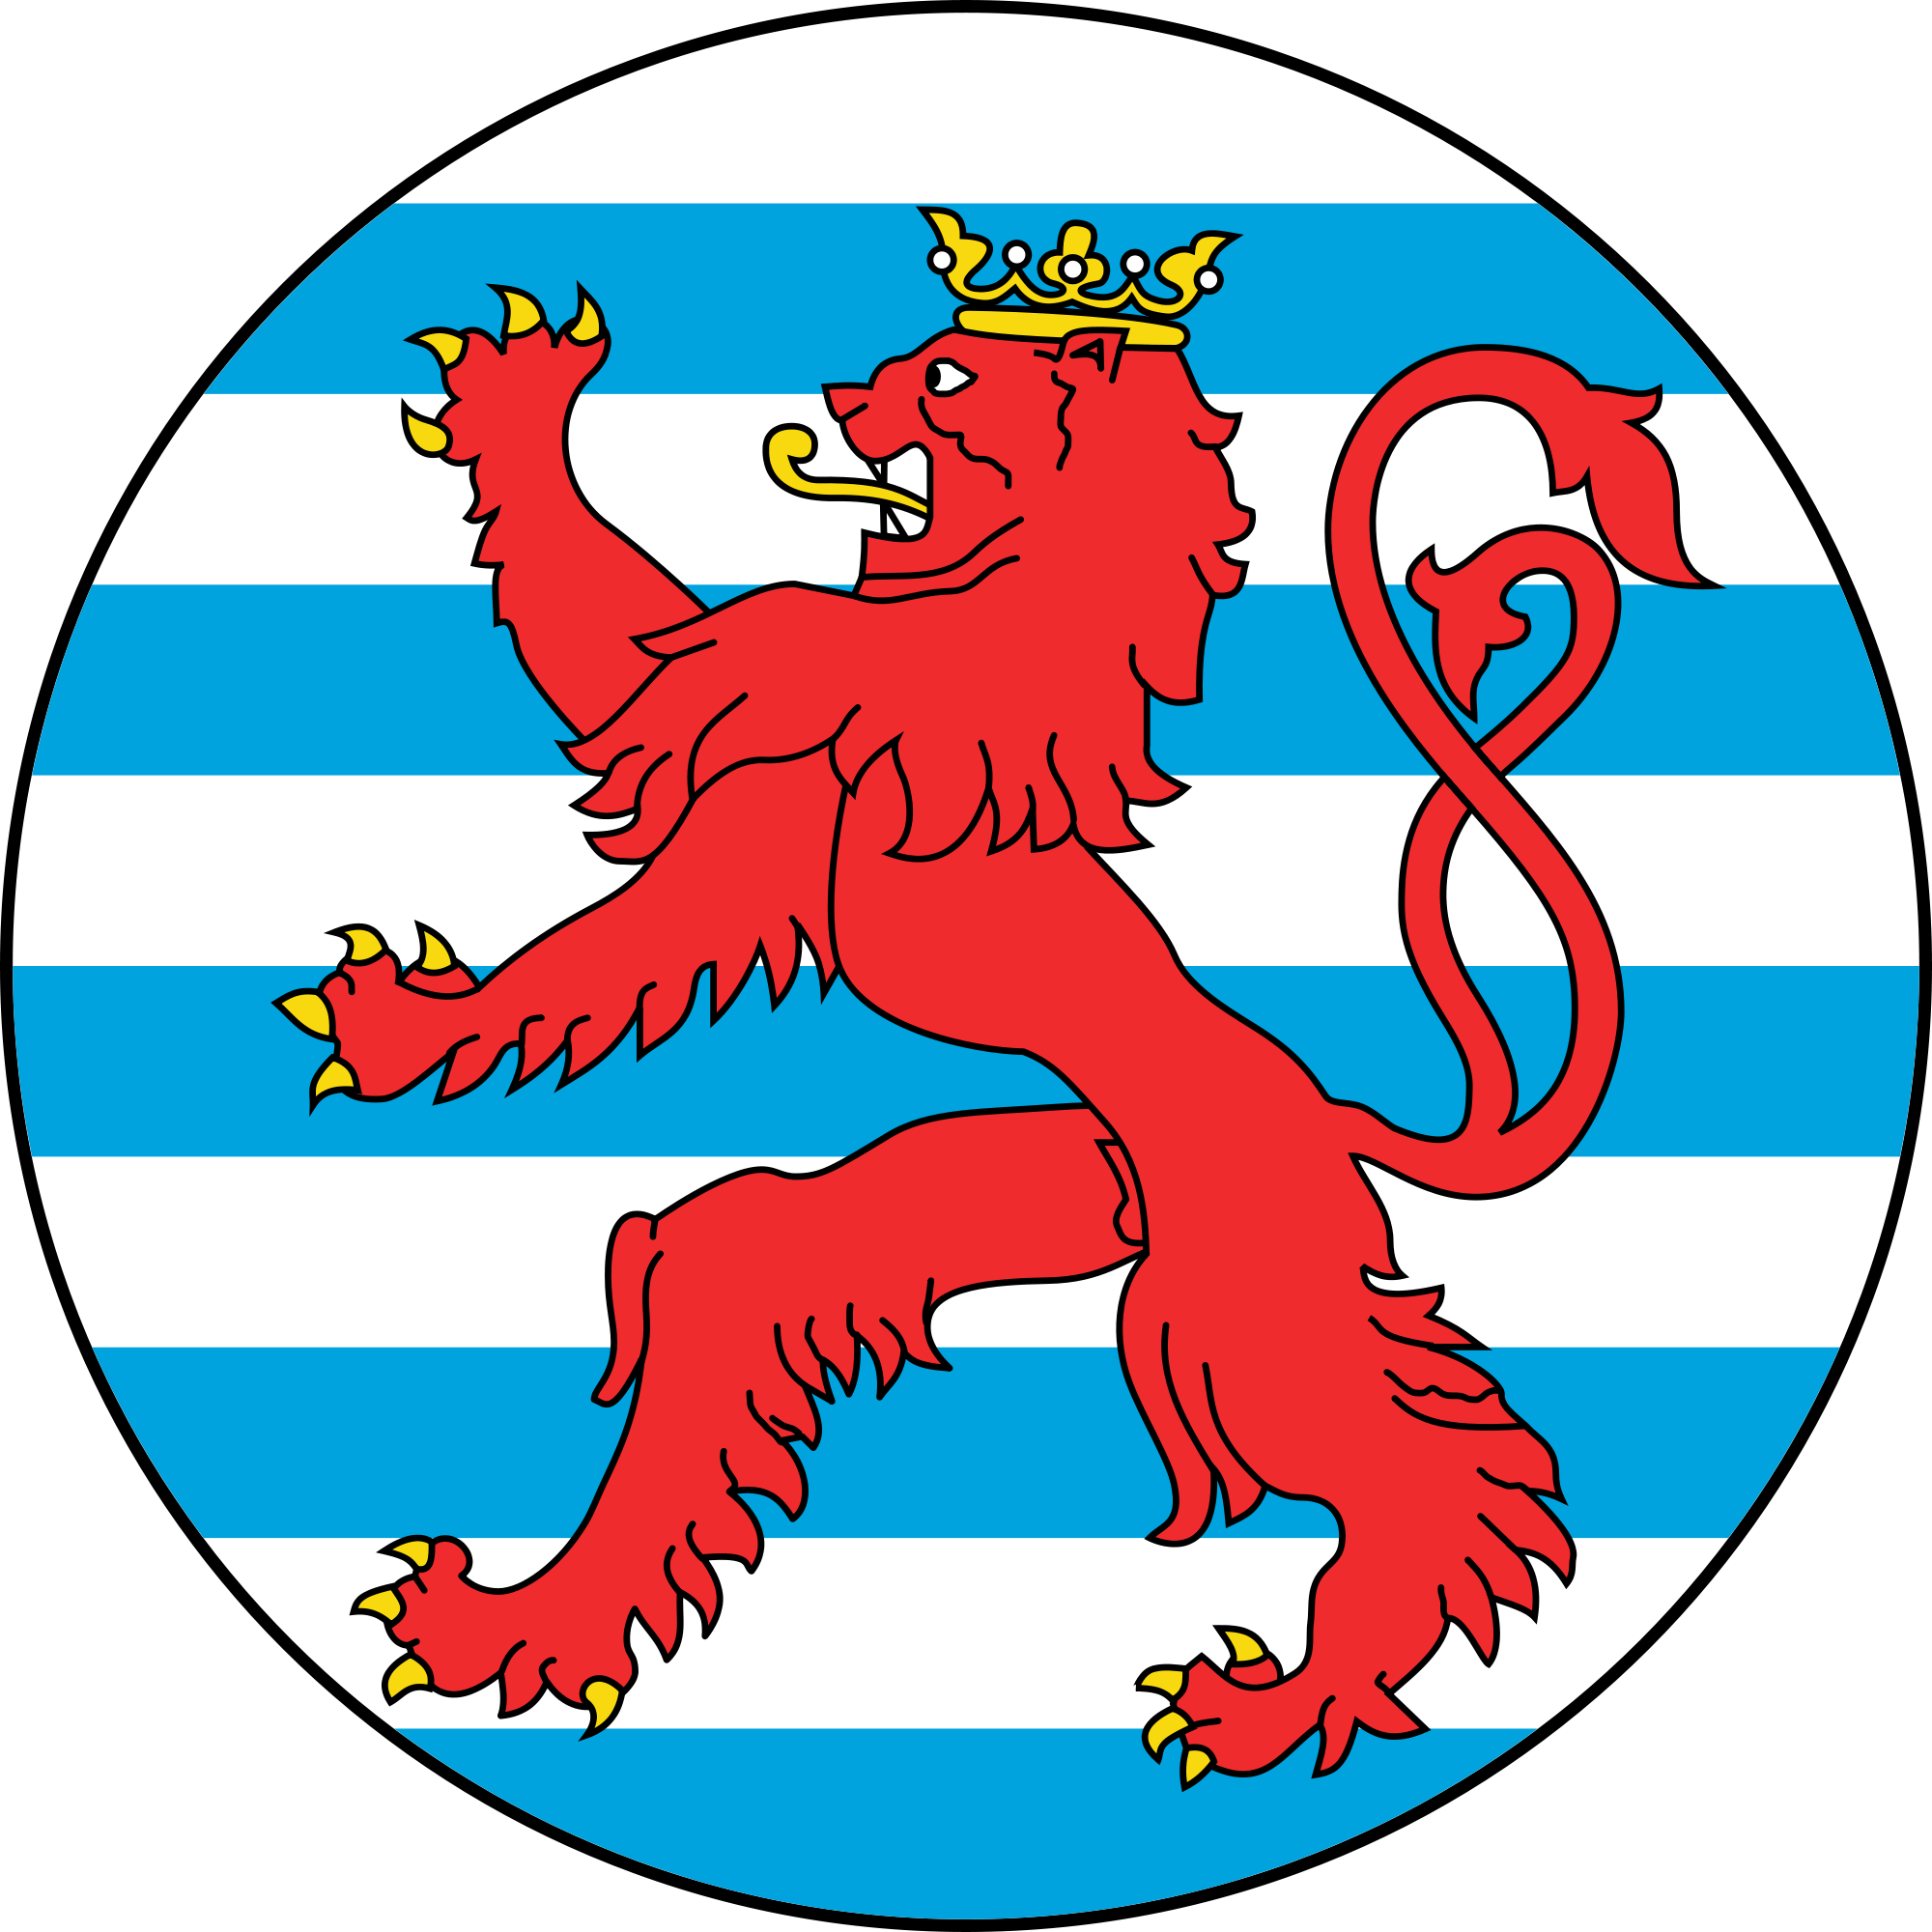 Luxembourg Aviation Rondel - Luxembourg Roundel (2000x2000)